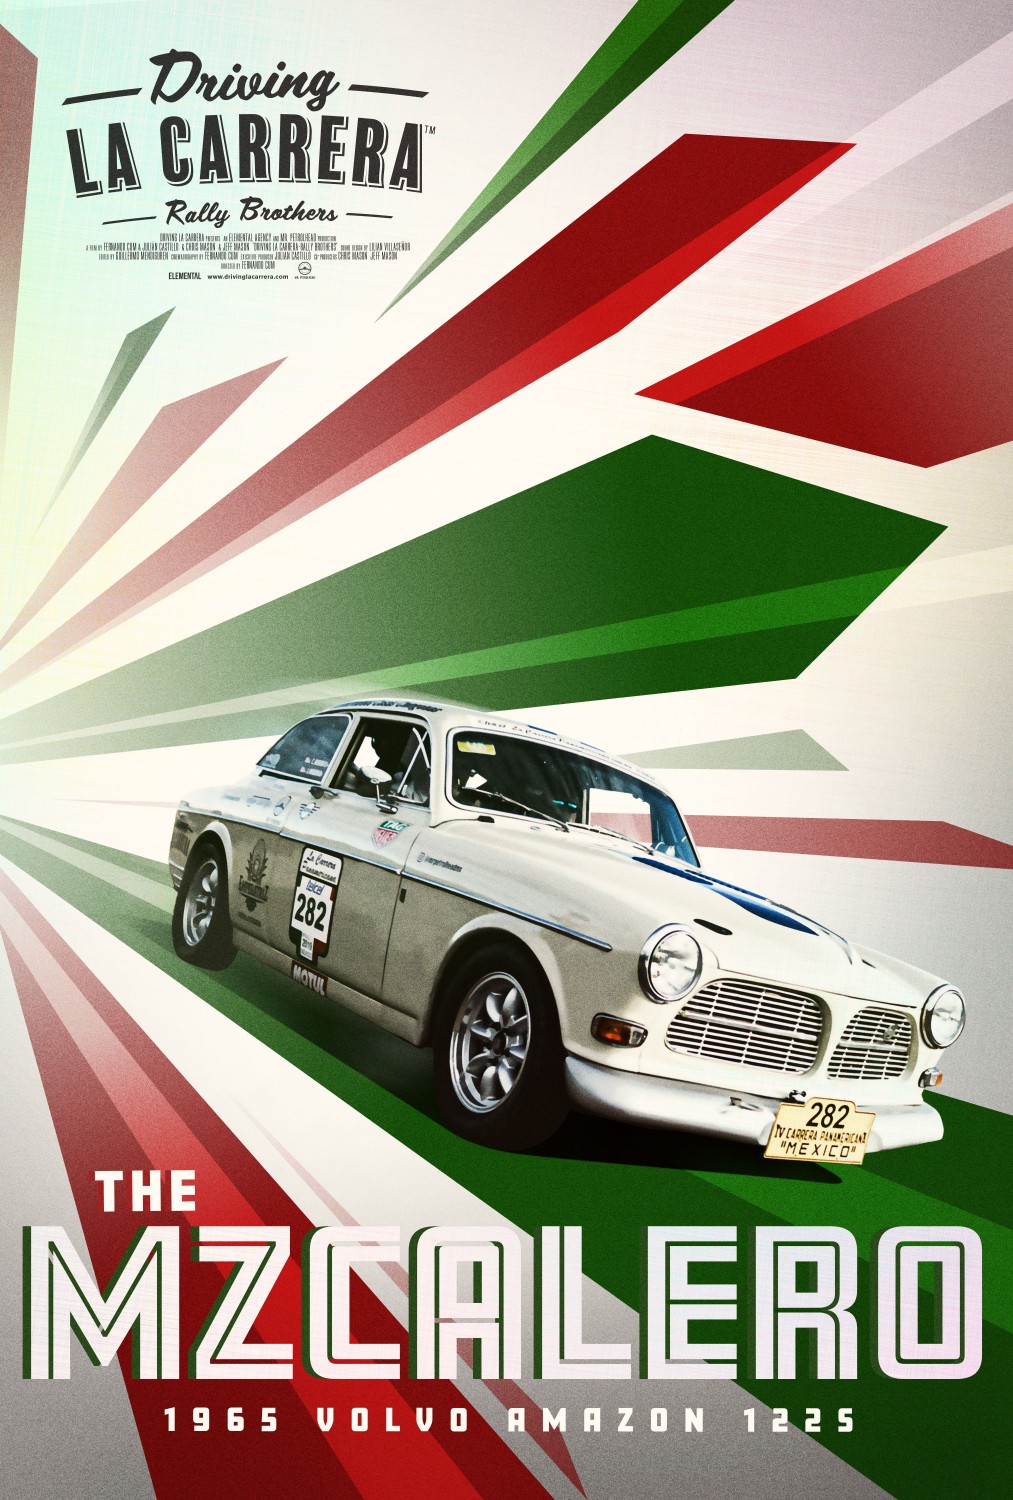 Extra Large Movie Poster Image for Driving La Carrera